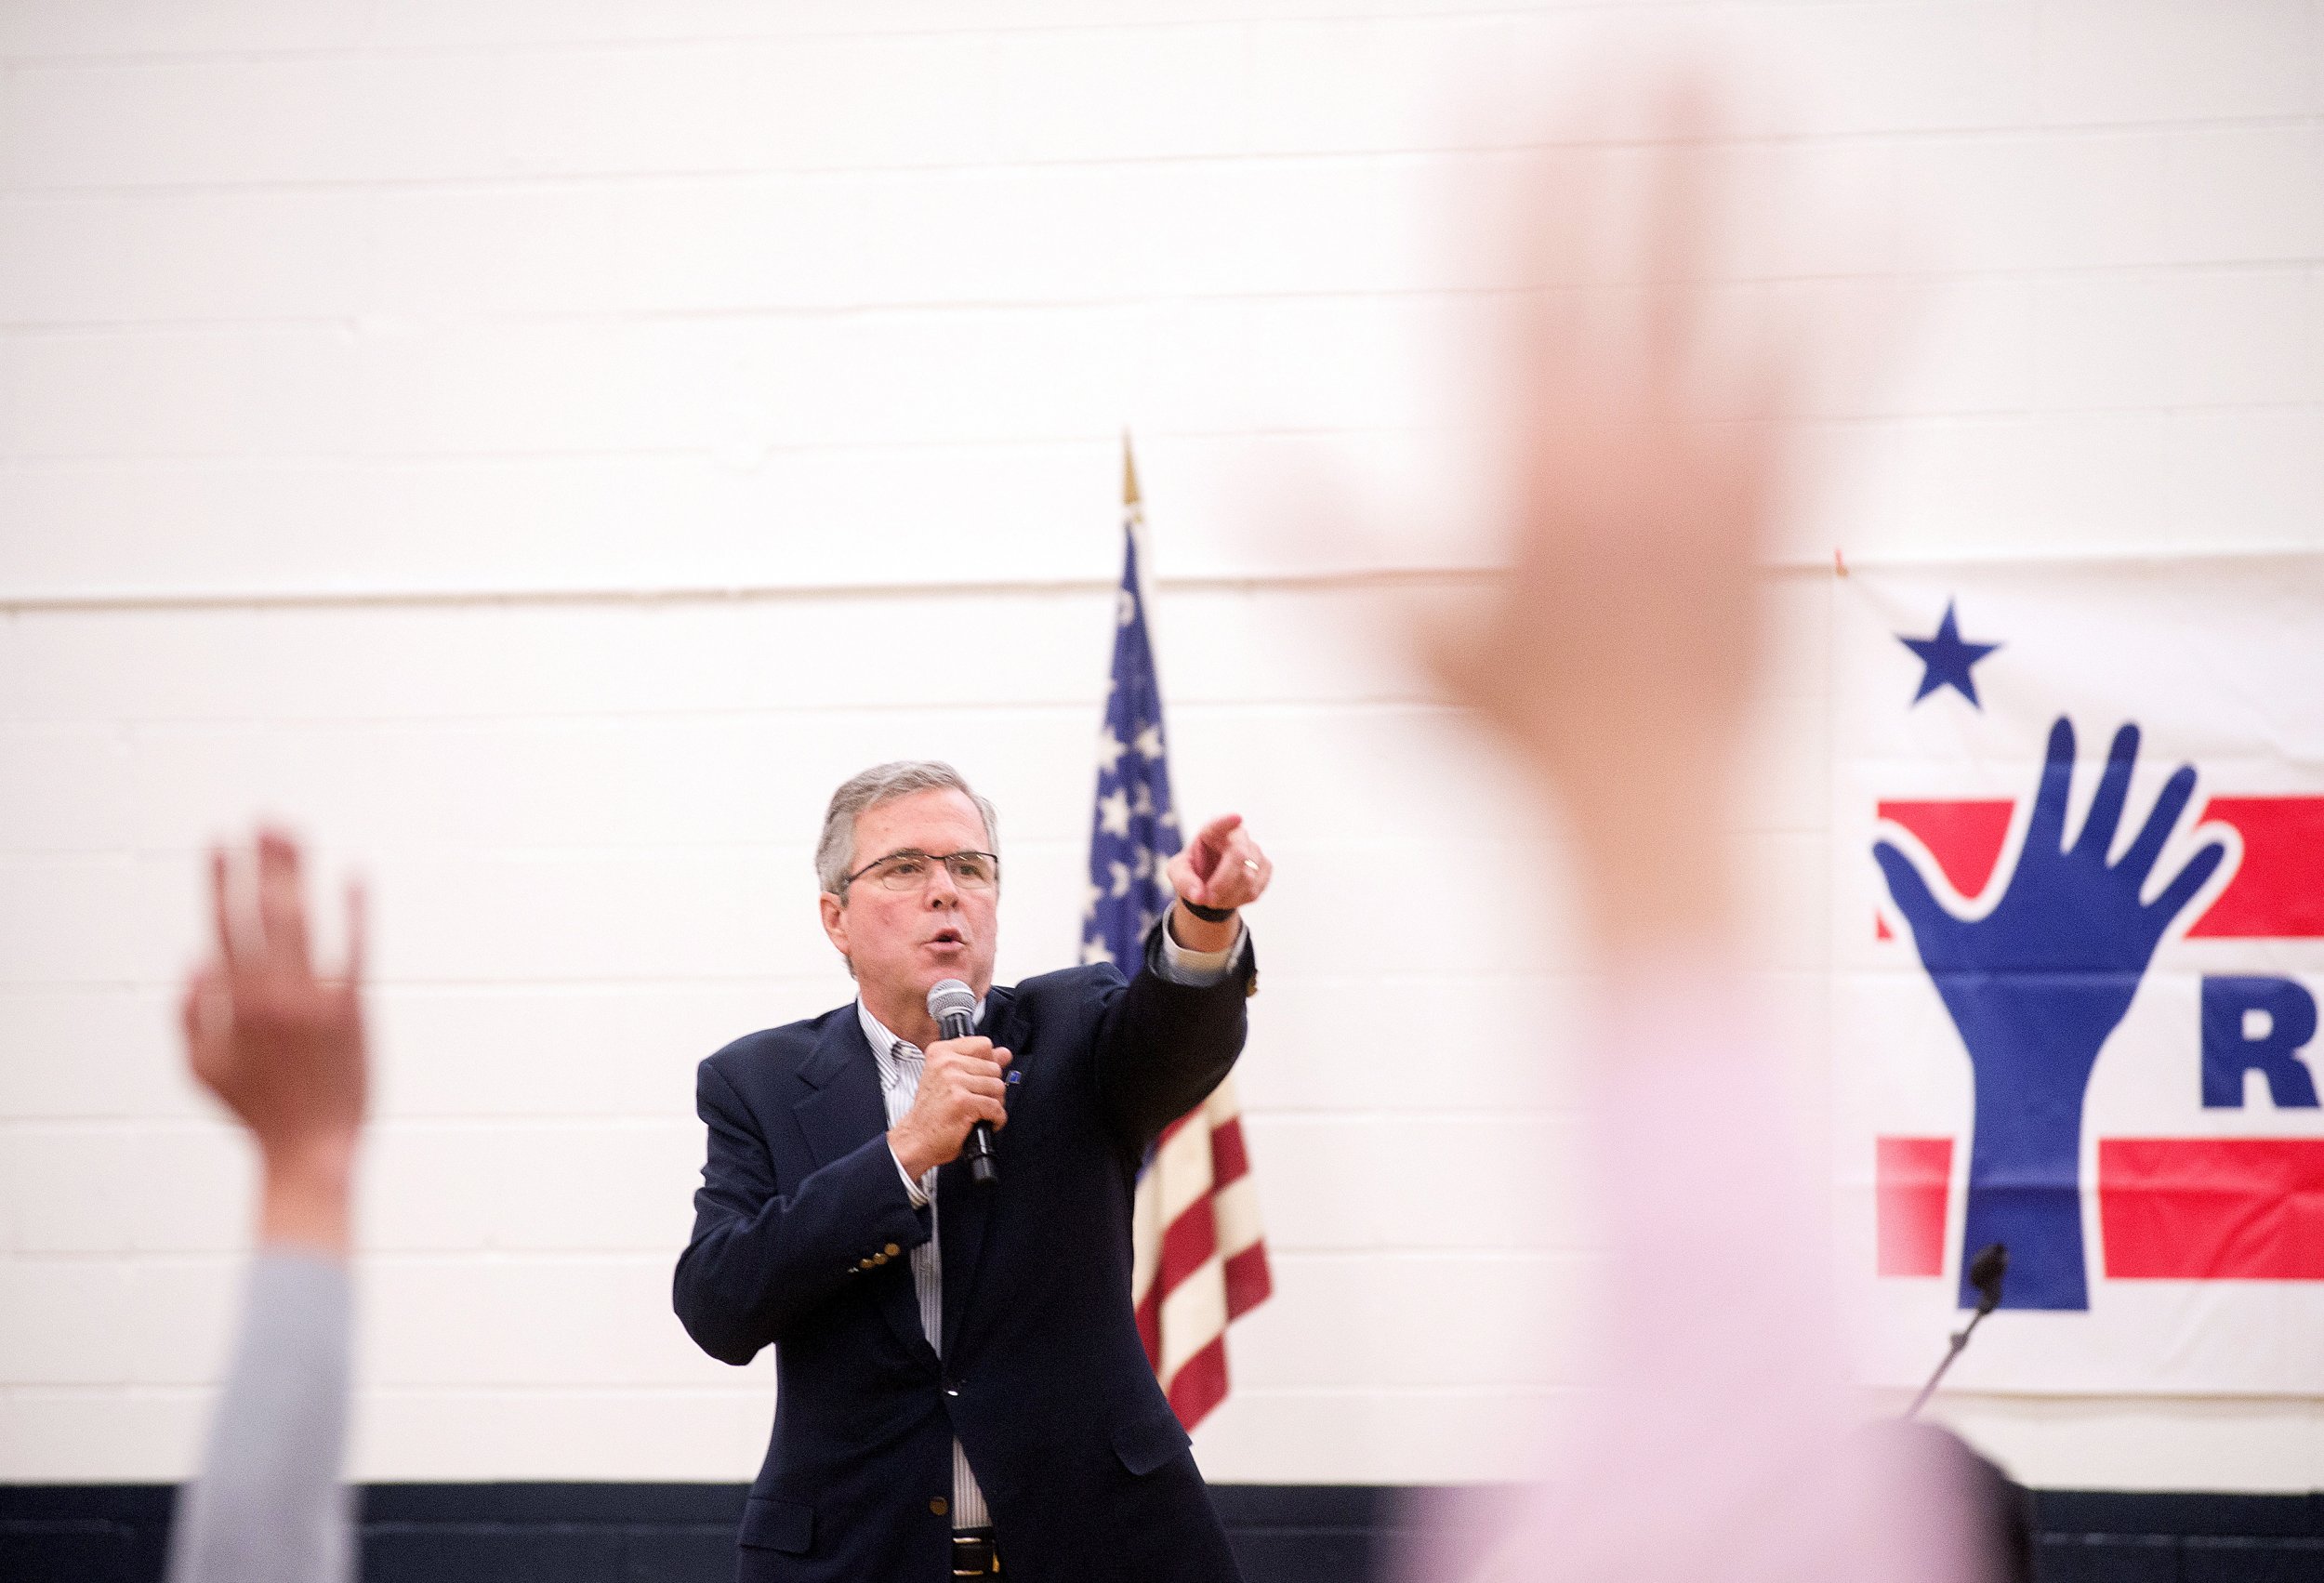 Jeb Bush Slips by Saying He'll Run for President in 2016